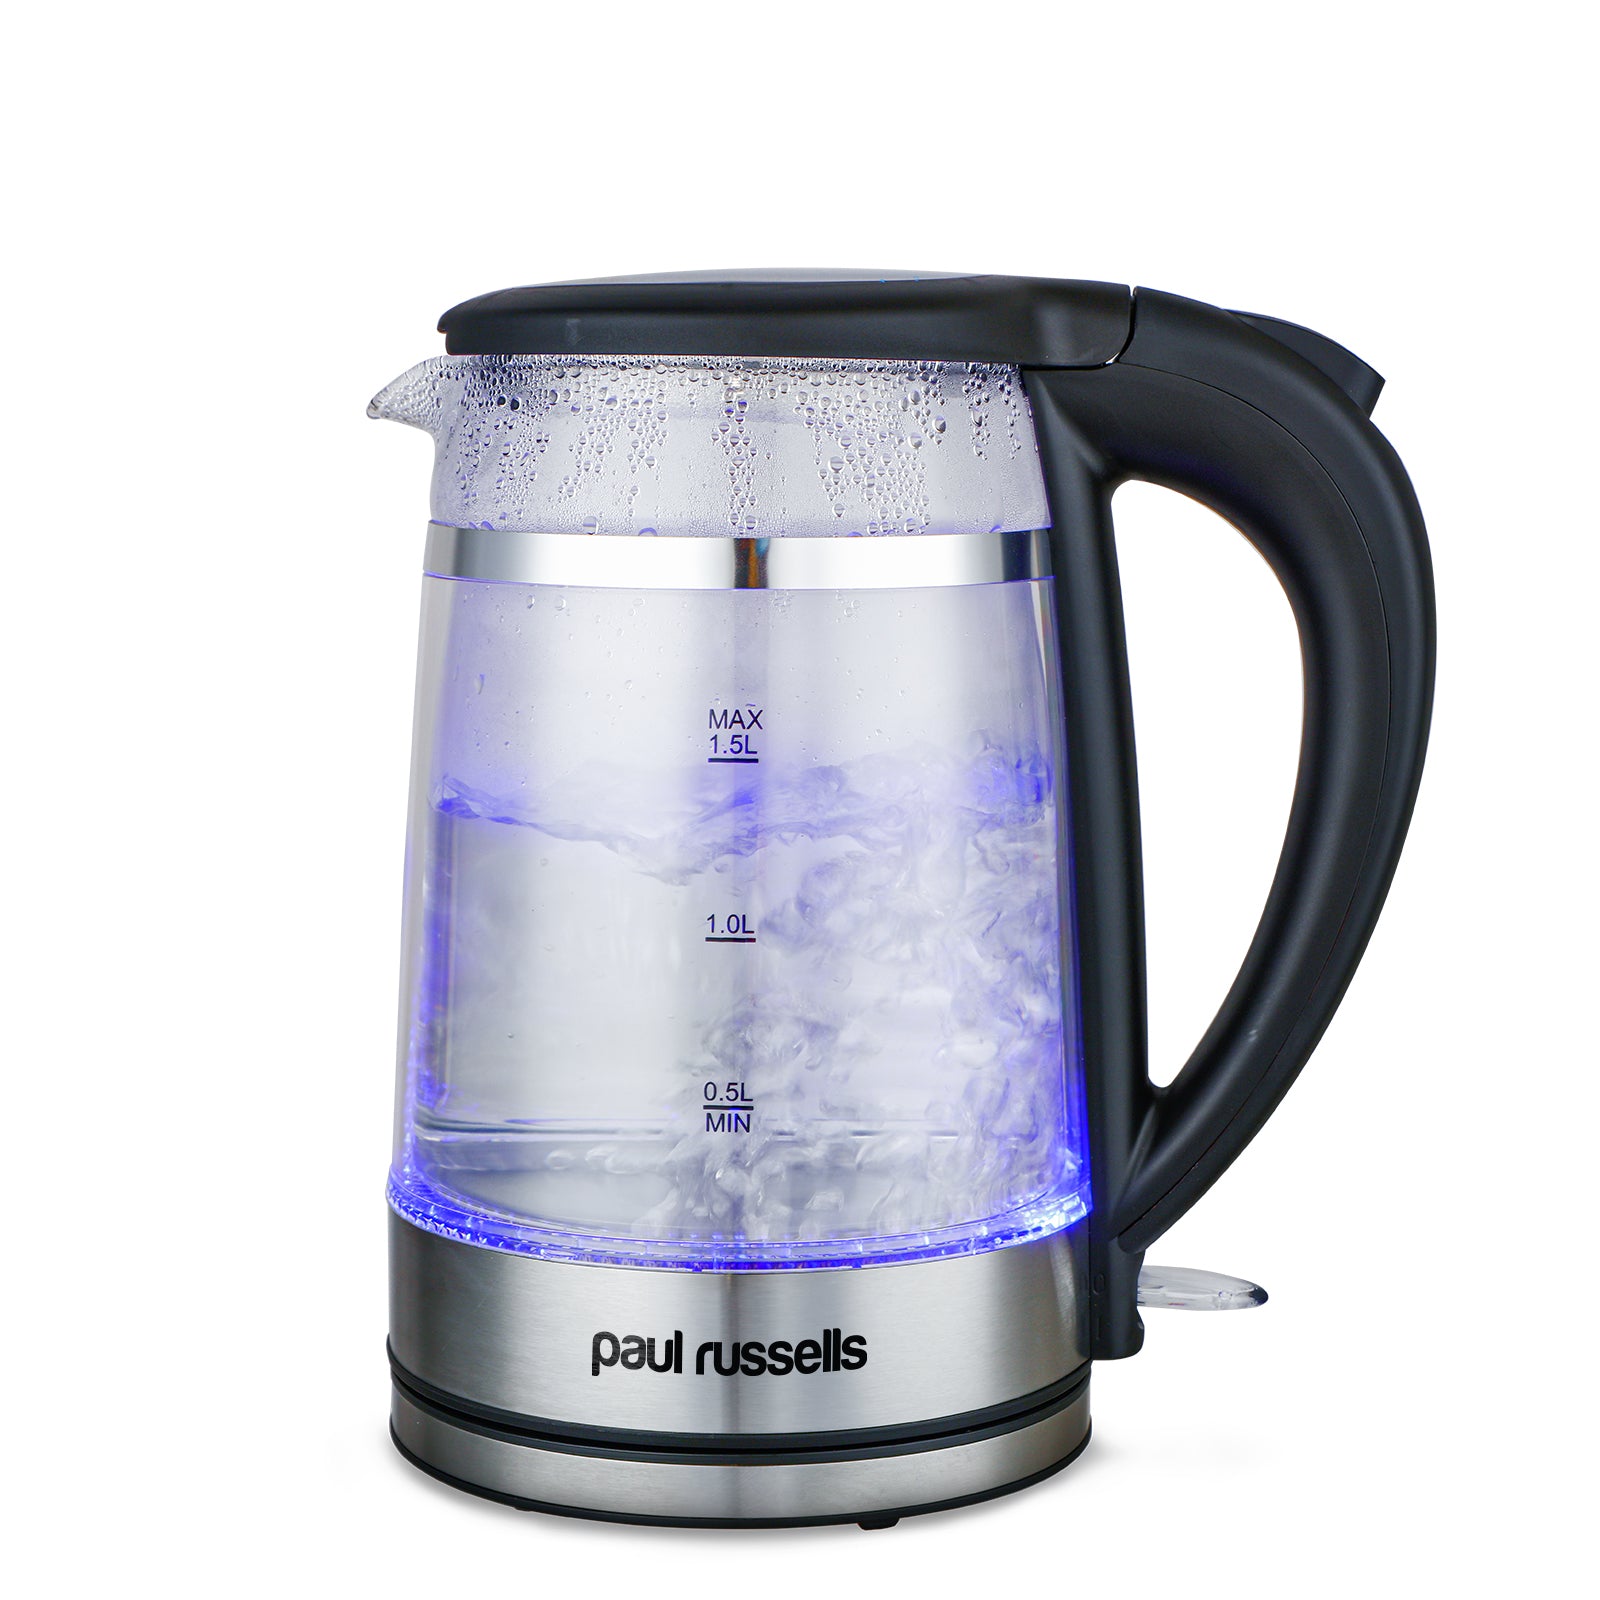 Electric Glass Kettle, Burn proof Double layer Glass,3000W 1.5L with Blue LED, Stainless Steel plate, Fast Boil Hot water dispenser Instant Kettle, Black